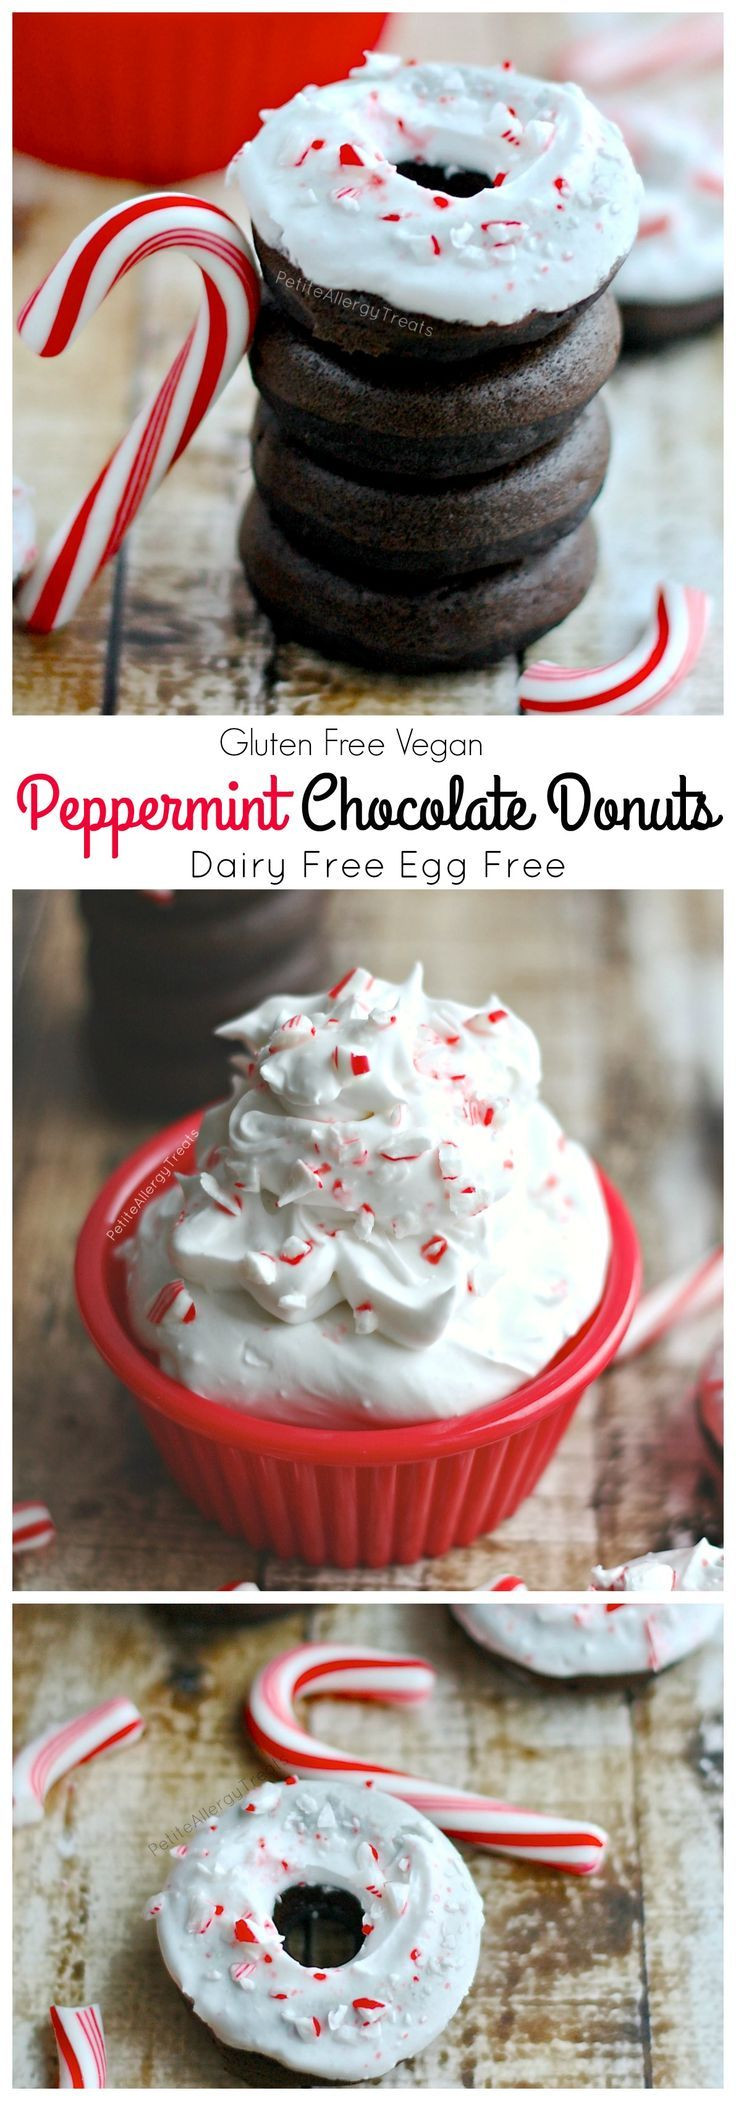 Gluten Free Christmas Candy
 Peppermint Chocolate Donuts gluten free dairy free vegan